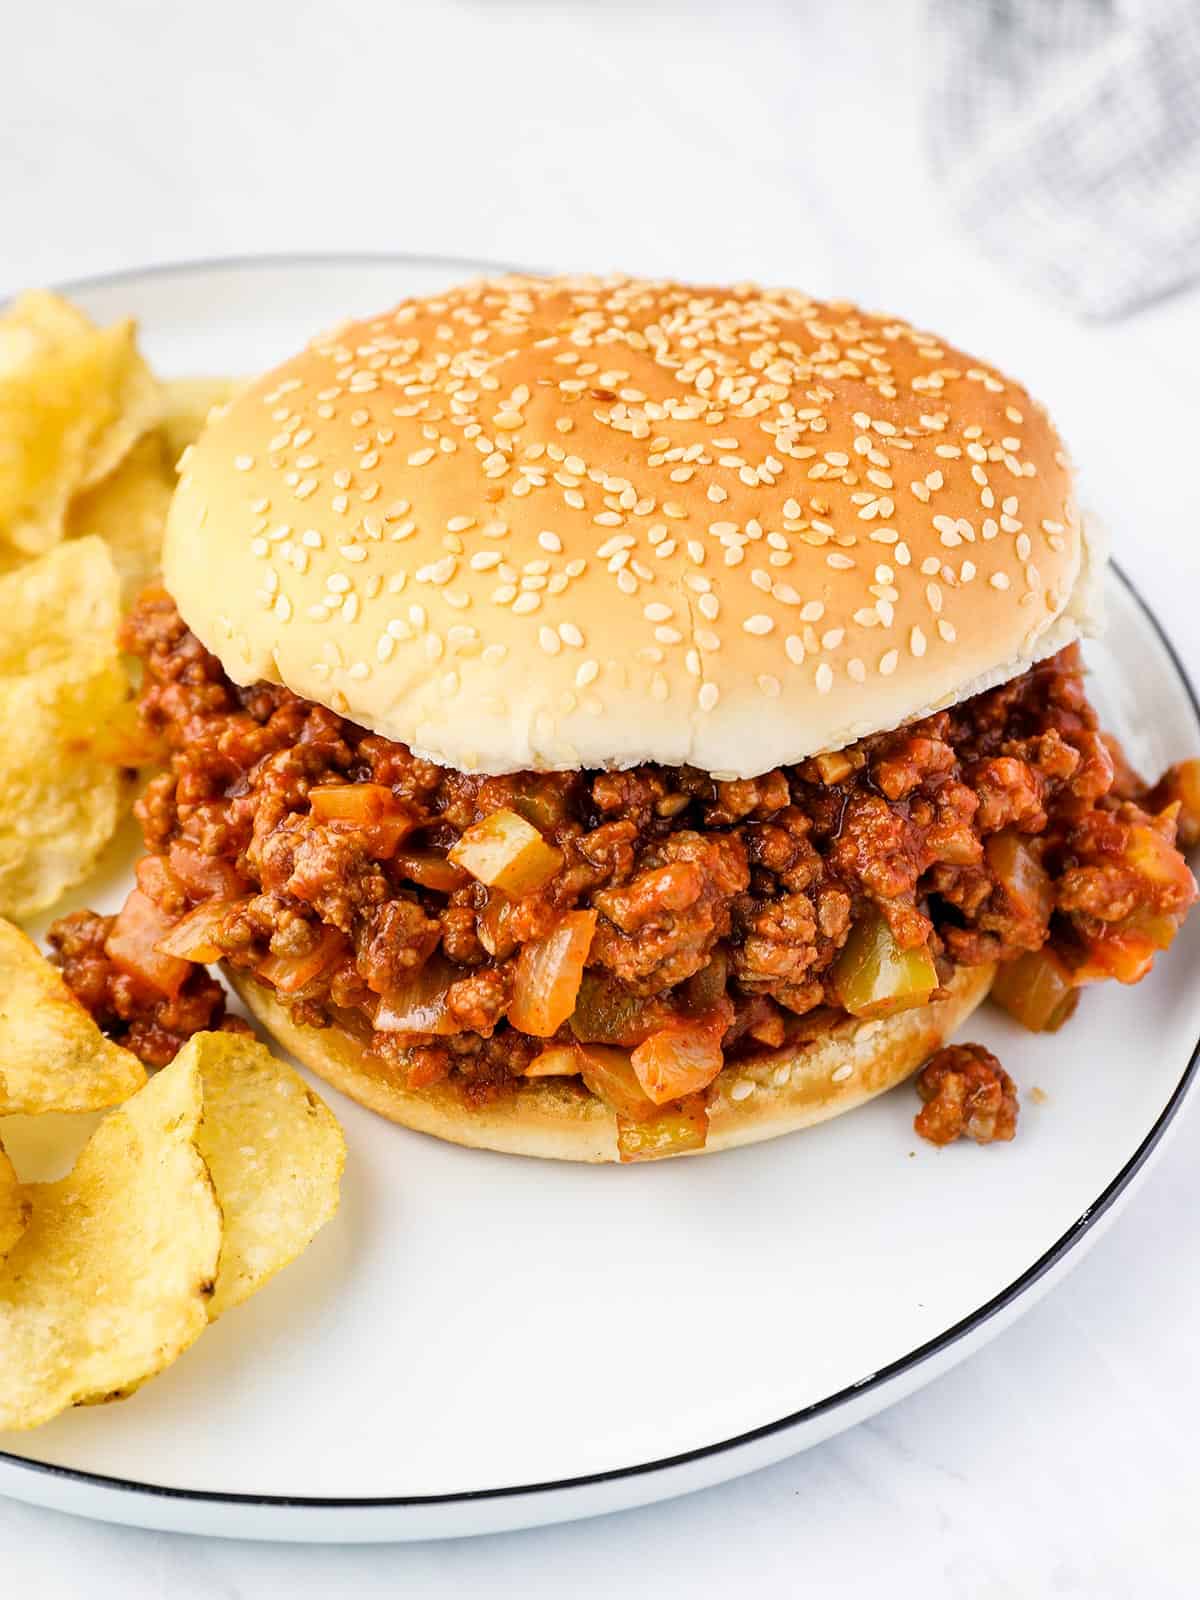 Side view of a sloppy joe on a plate with potato chips.